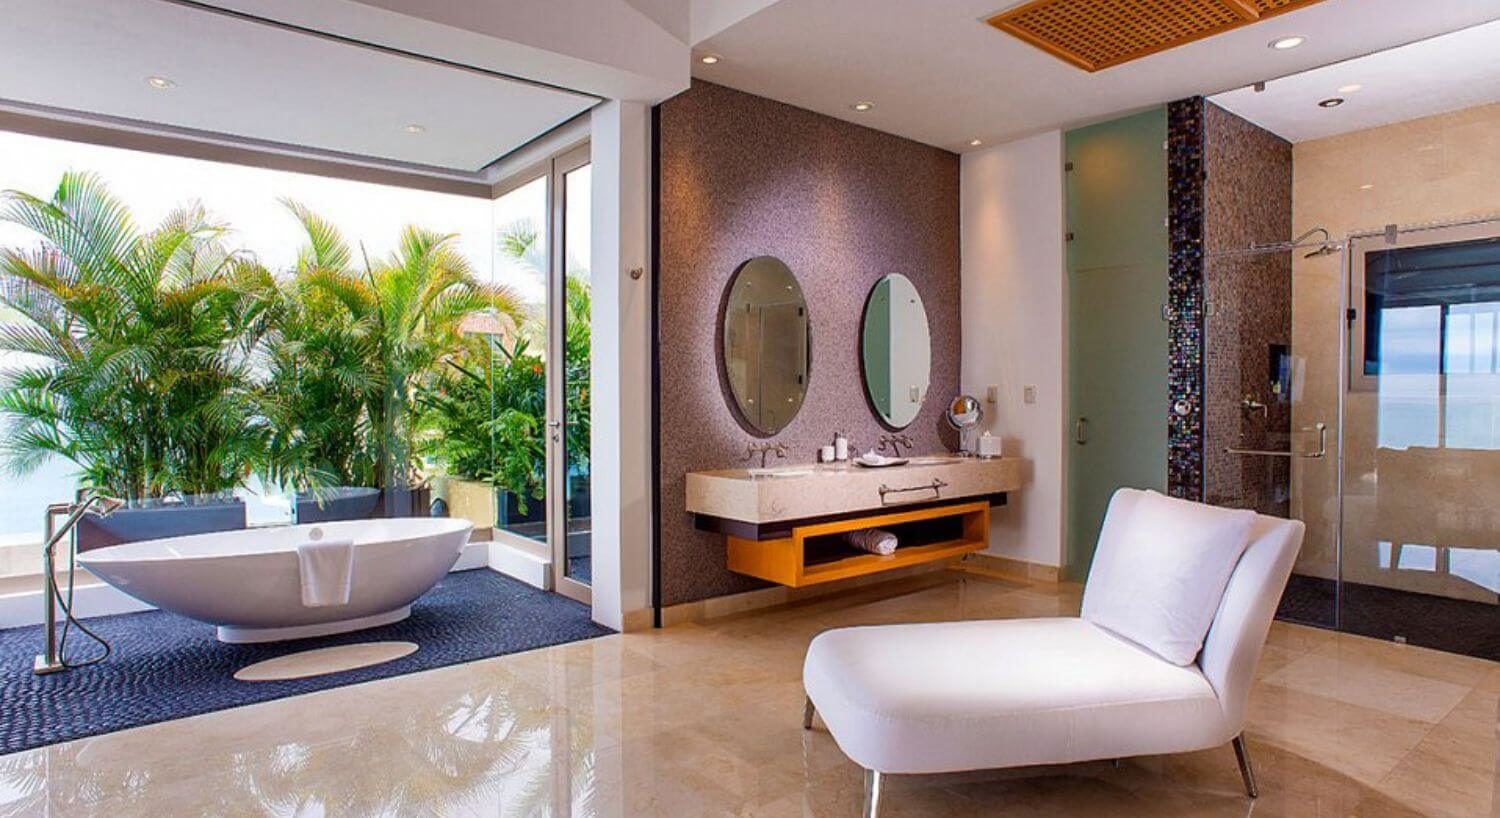 A spacious bathroom with dual sink vanity and mirrors above each sink, a plush white lounge chair, a walk in shower, a teardrop shaped bathtub set on a rock floor with windows overlooking the ocean and palm trees.